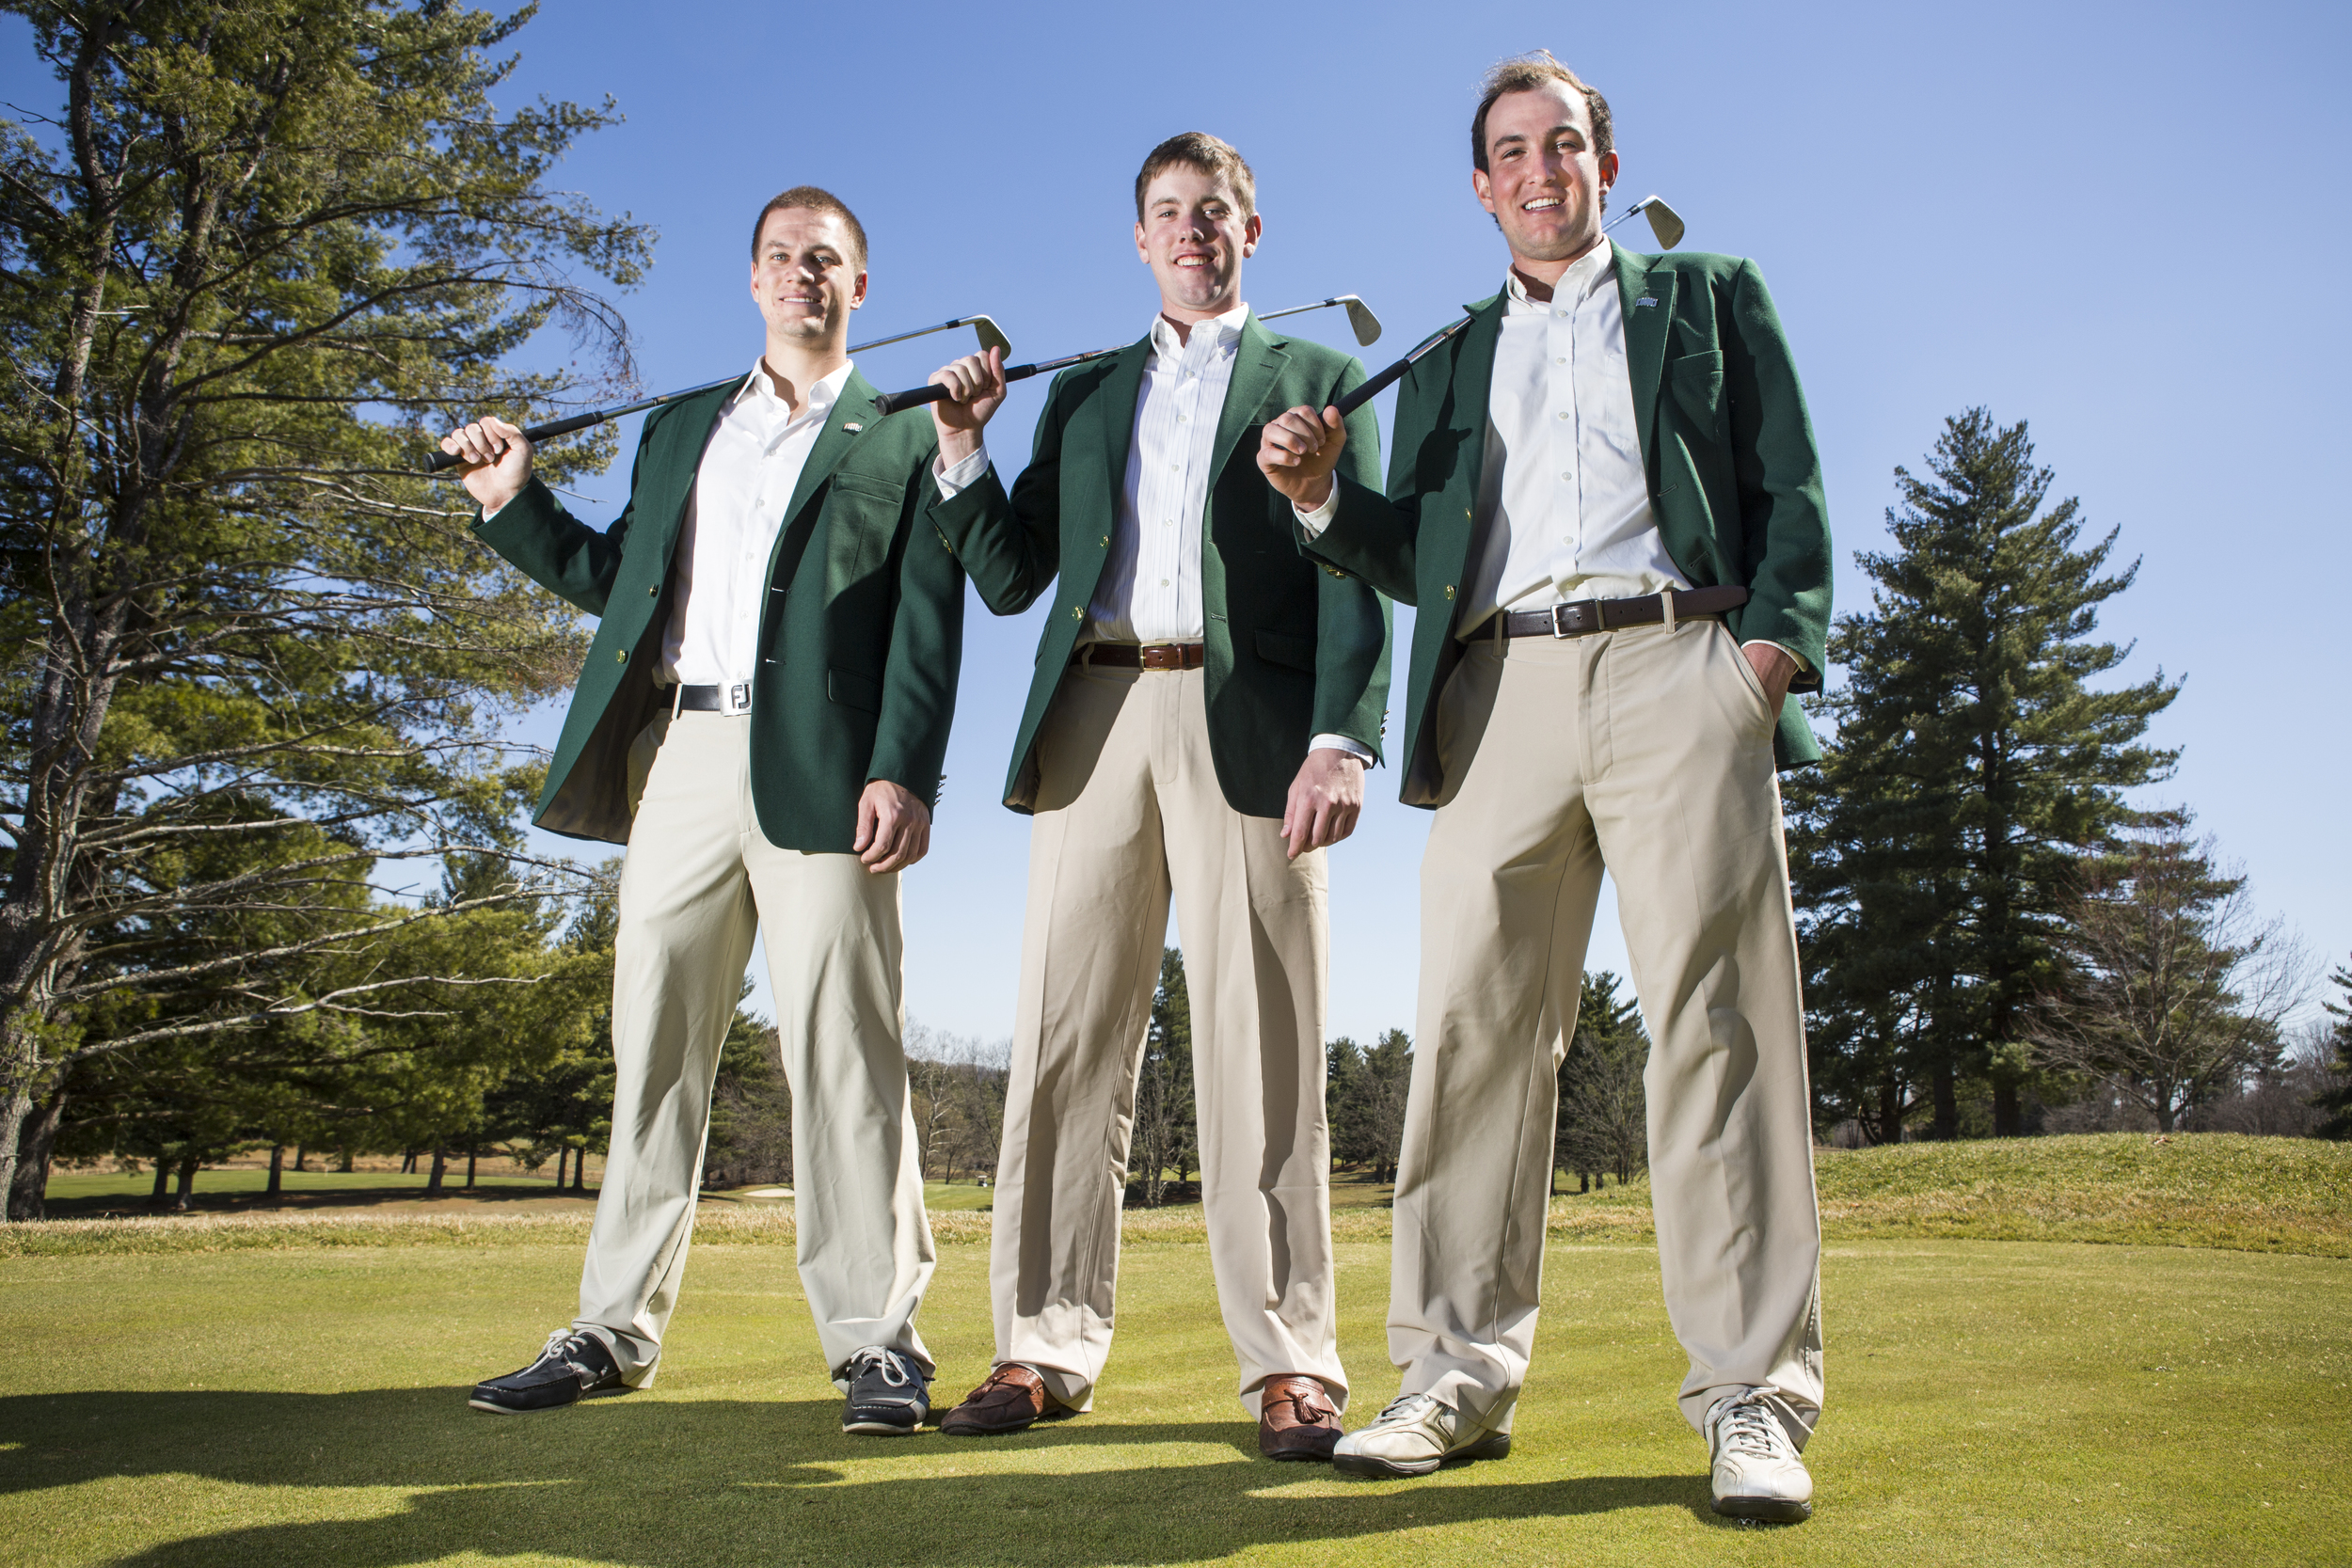  (from left to right) Will Stines, Thomas Leech and Andrew Mlynarski, all seniors on the Ohio University men's golf team, pose for a portrait at the Athens Country Club in Athens, Ohio, on April 1, 2015. 